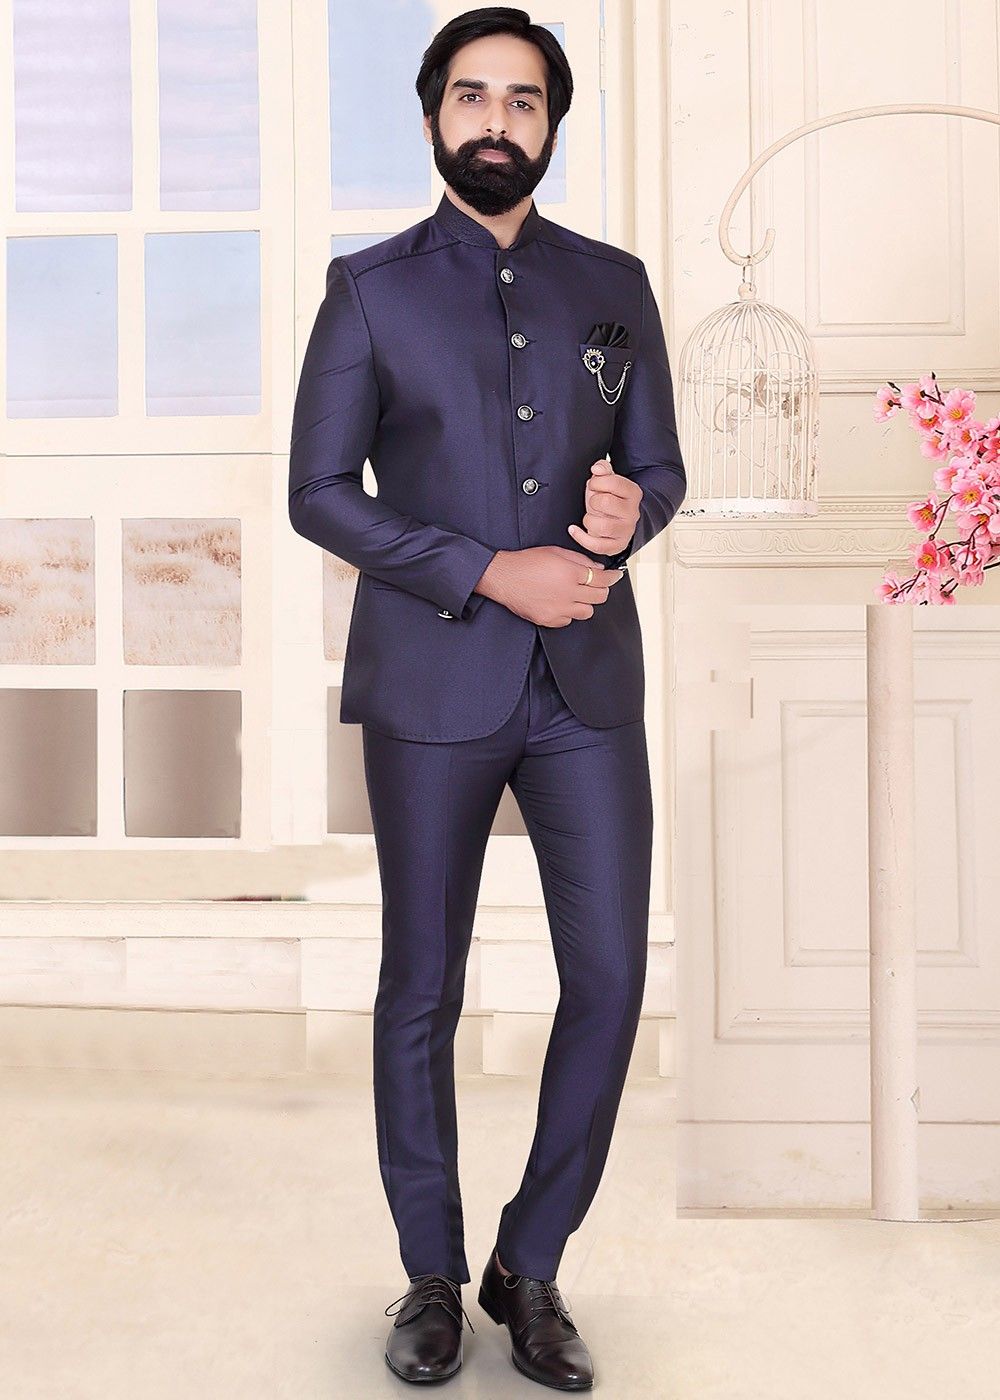 Buy Jodhpuri Suits for Men in Latest Designs Online at AndaazFashion.com